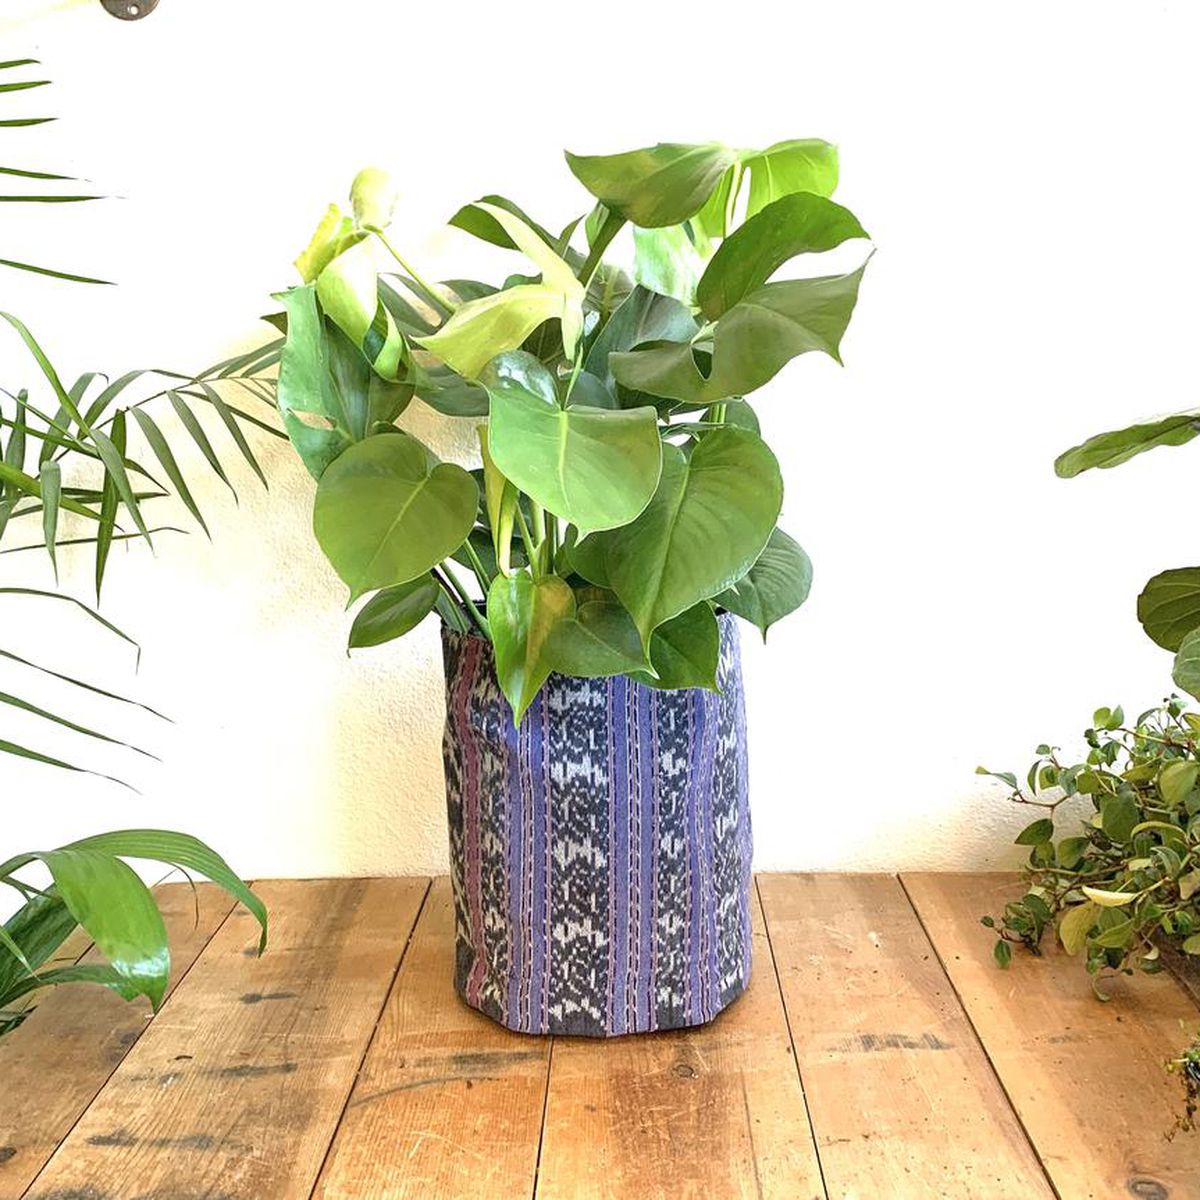 A plant inside a planter made of purple and black Ikat fabric